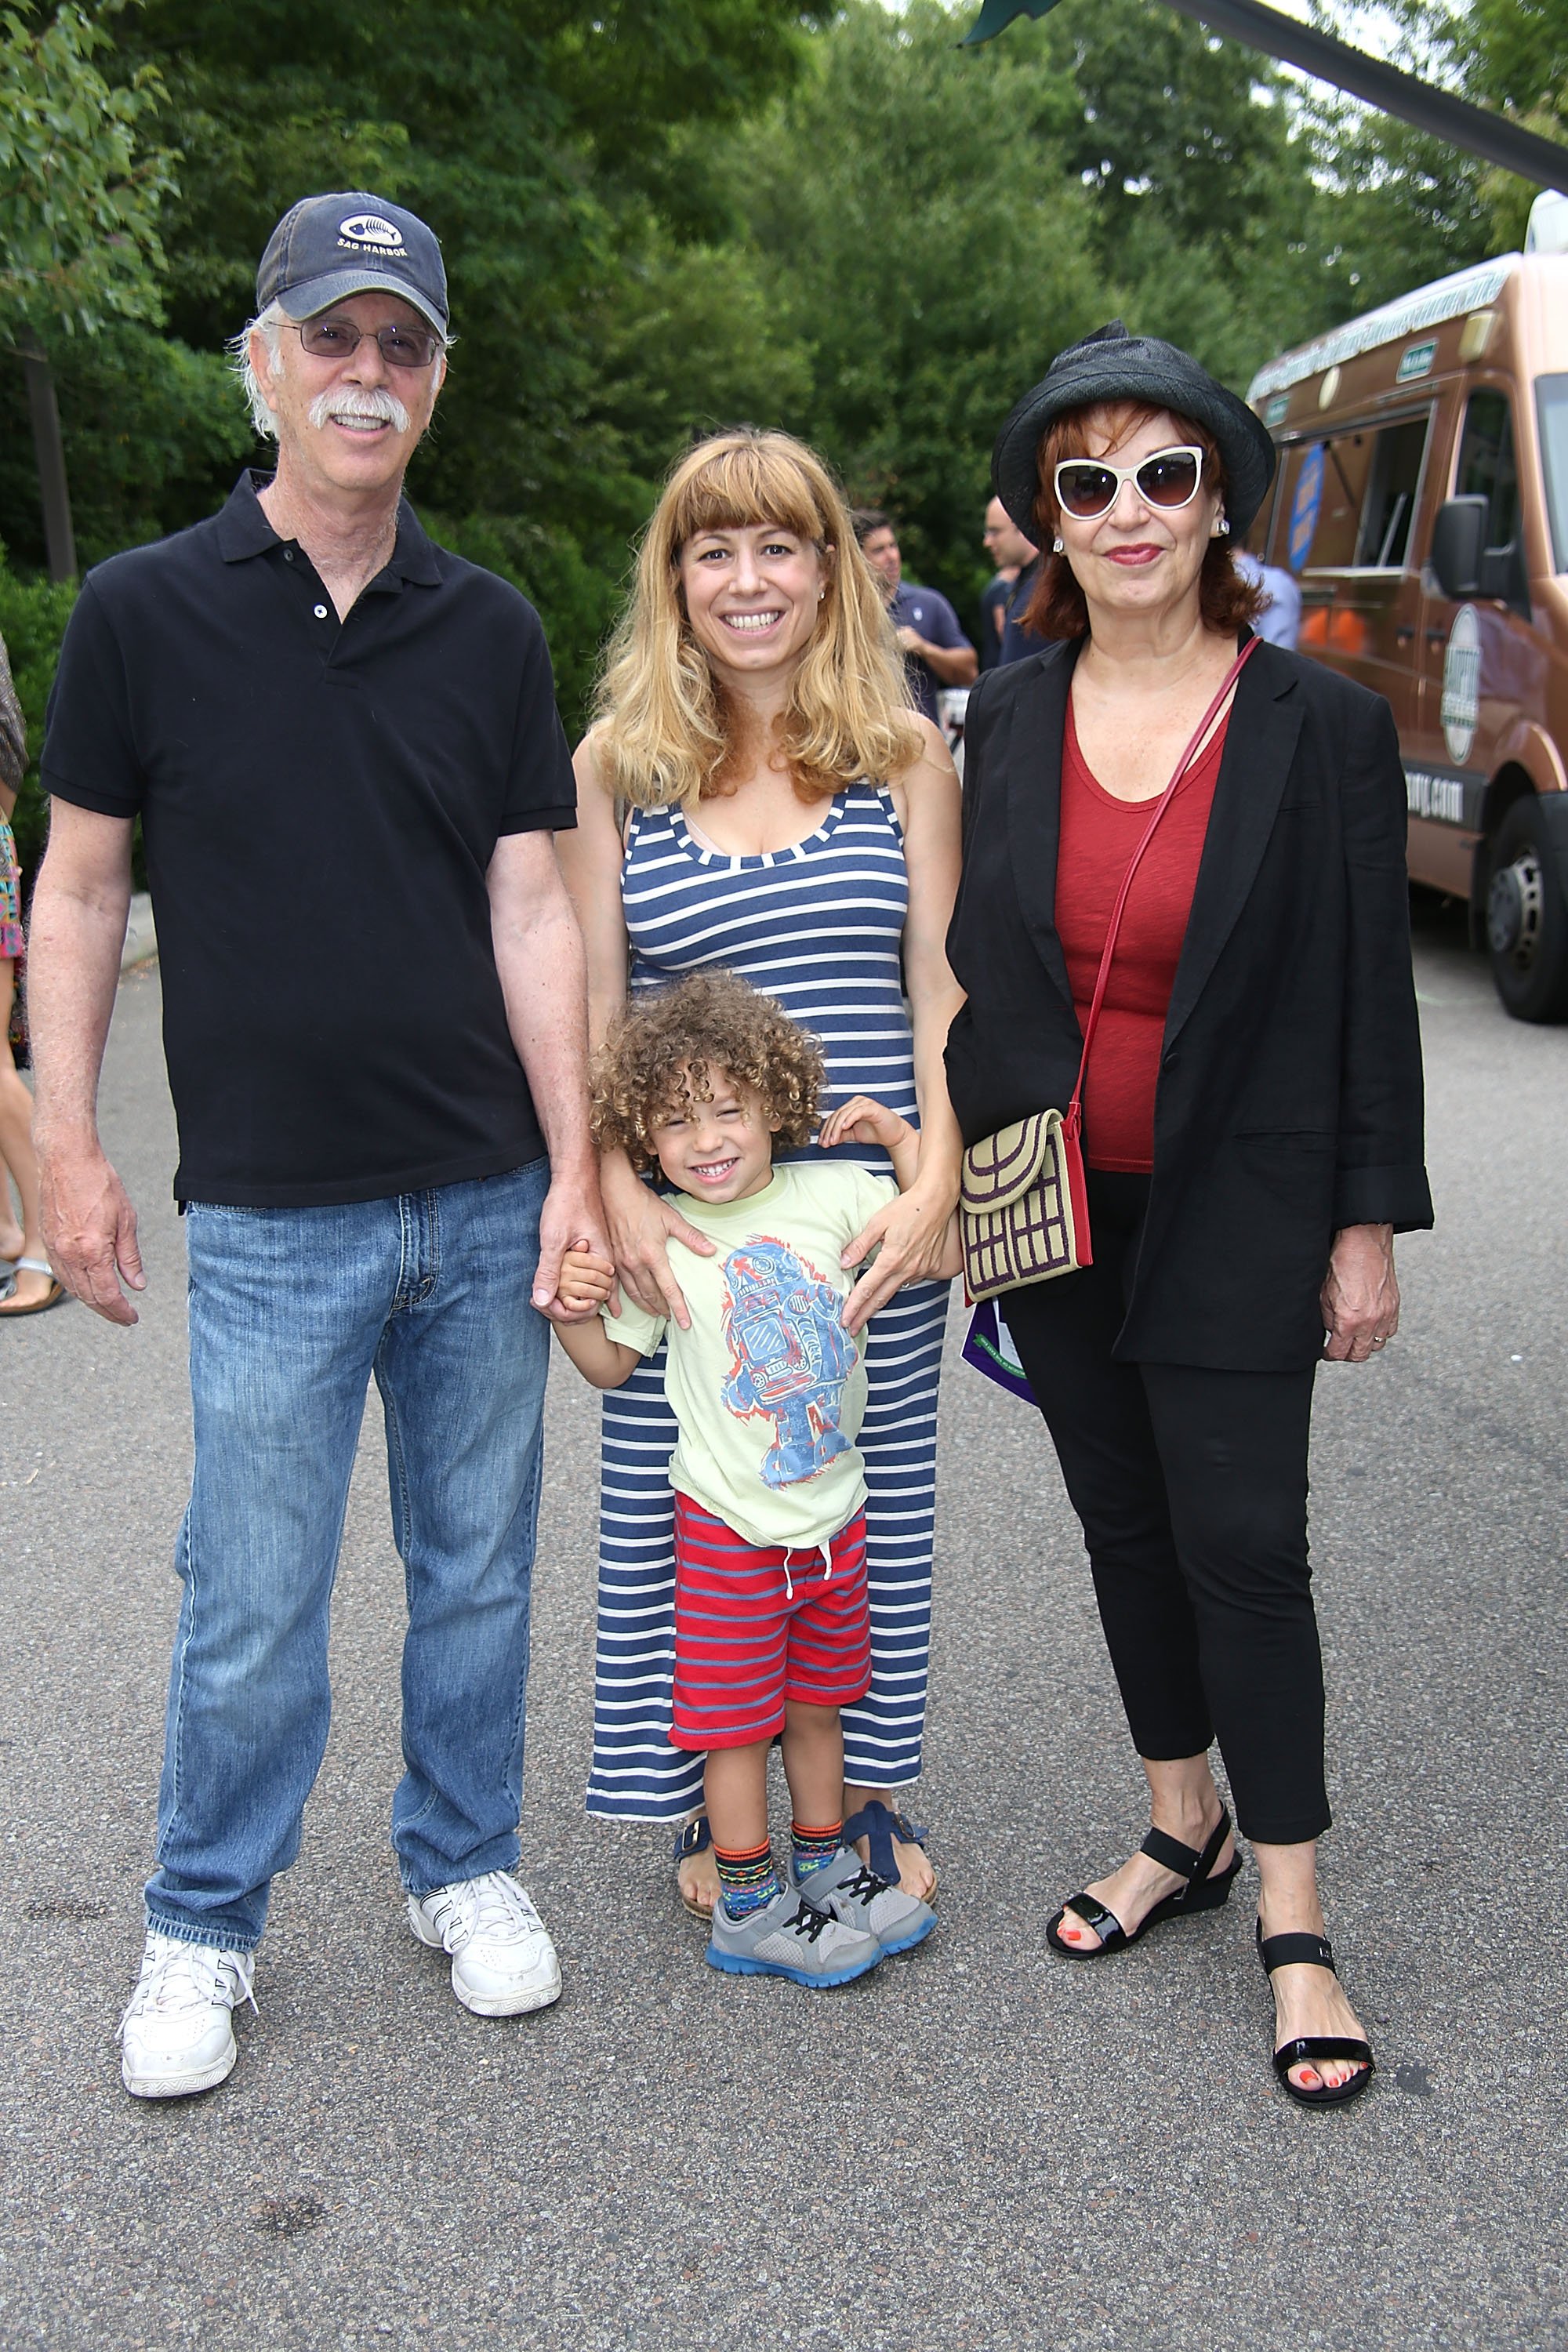 Steve Janowitz, Joy Behar (R) with her daughter Eve Behar and grandson Luca attend the 6th Annual Family Affair hosted by CMEE at Childrens Museum of the East End on July 19, 2014 in Bridgehampton, New York. | Source: Getty Images